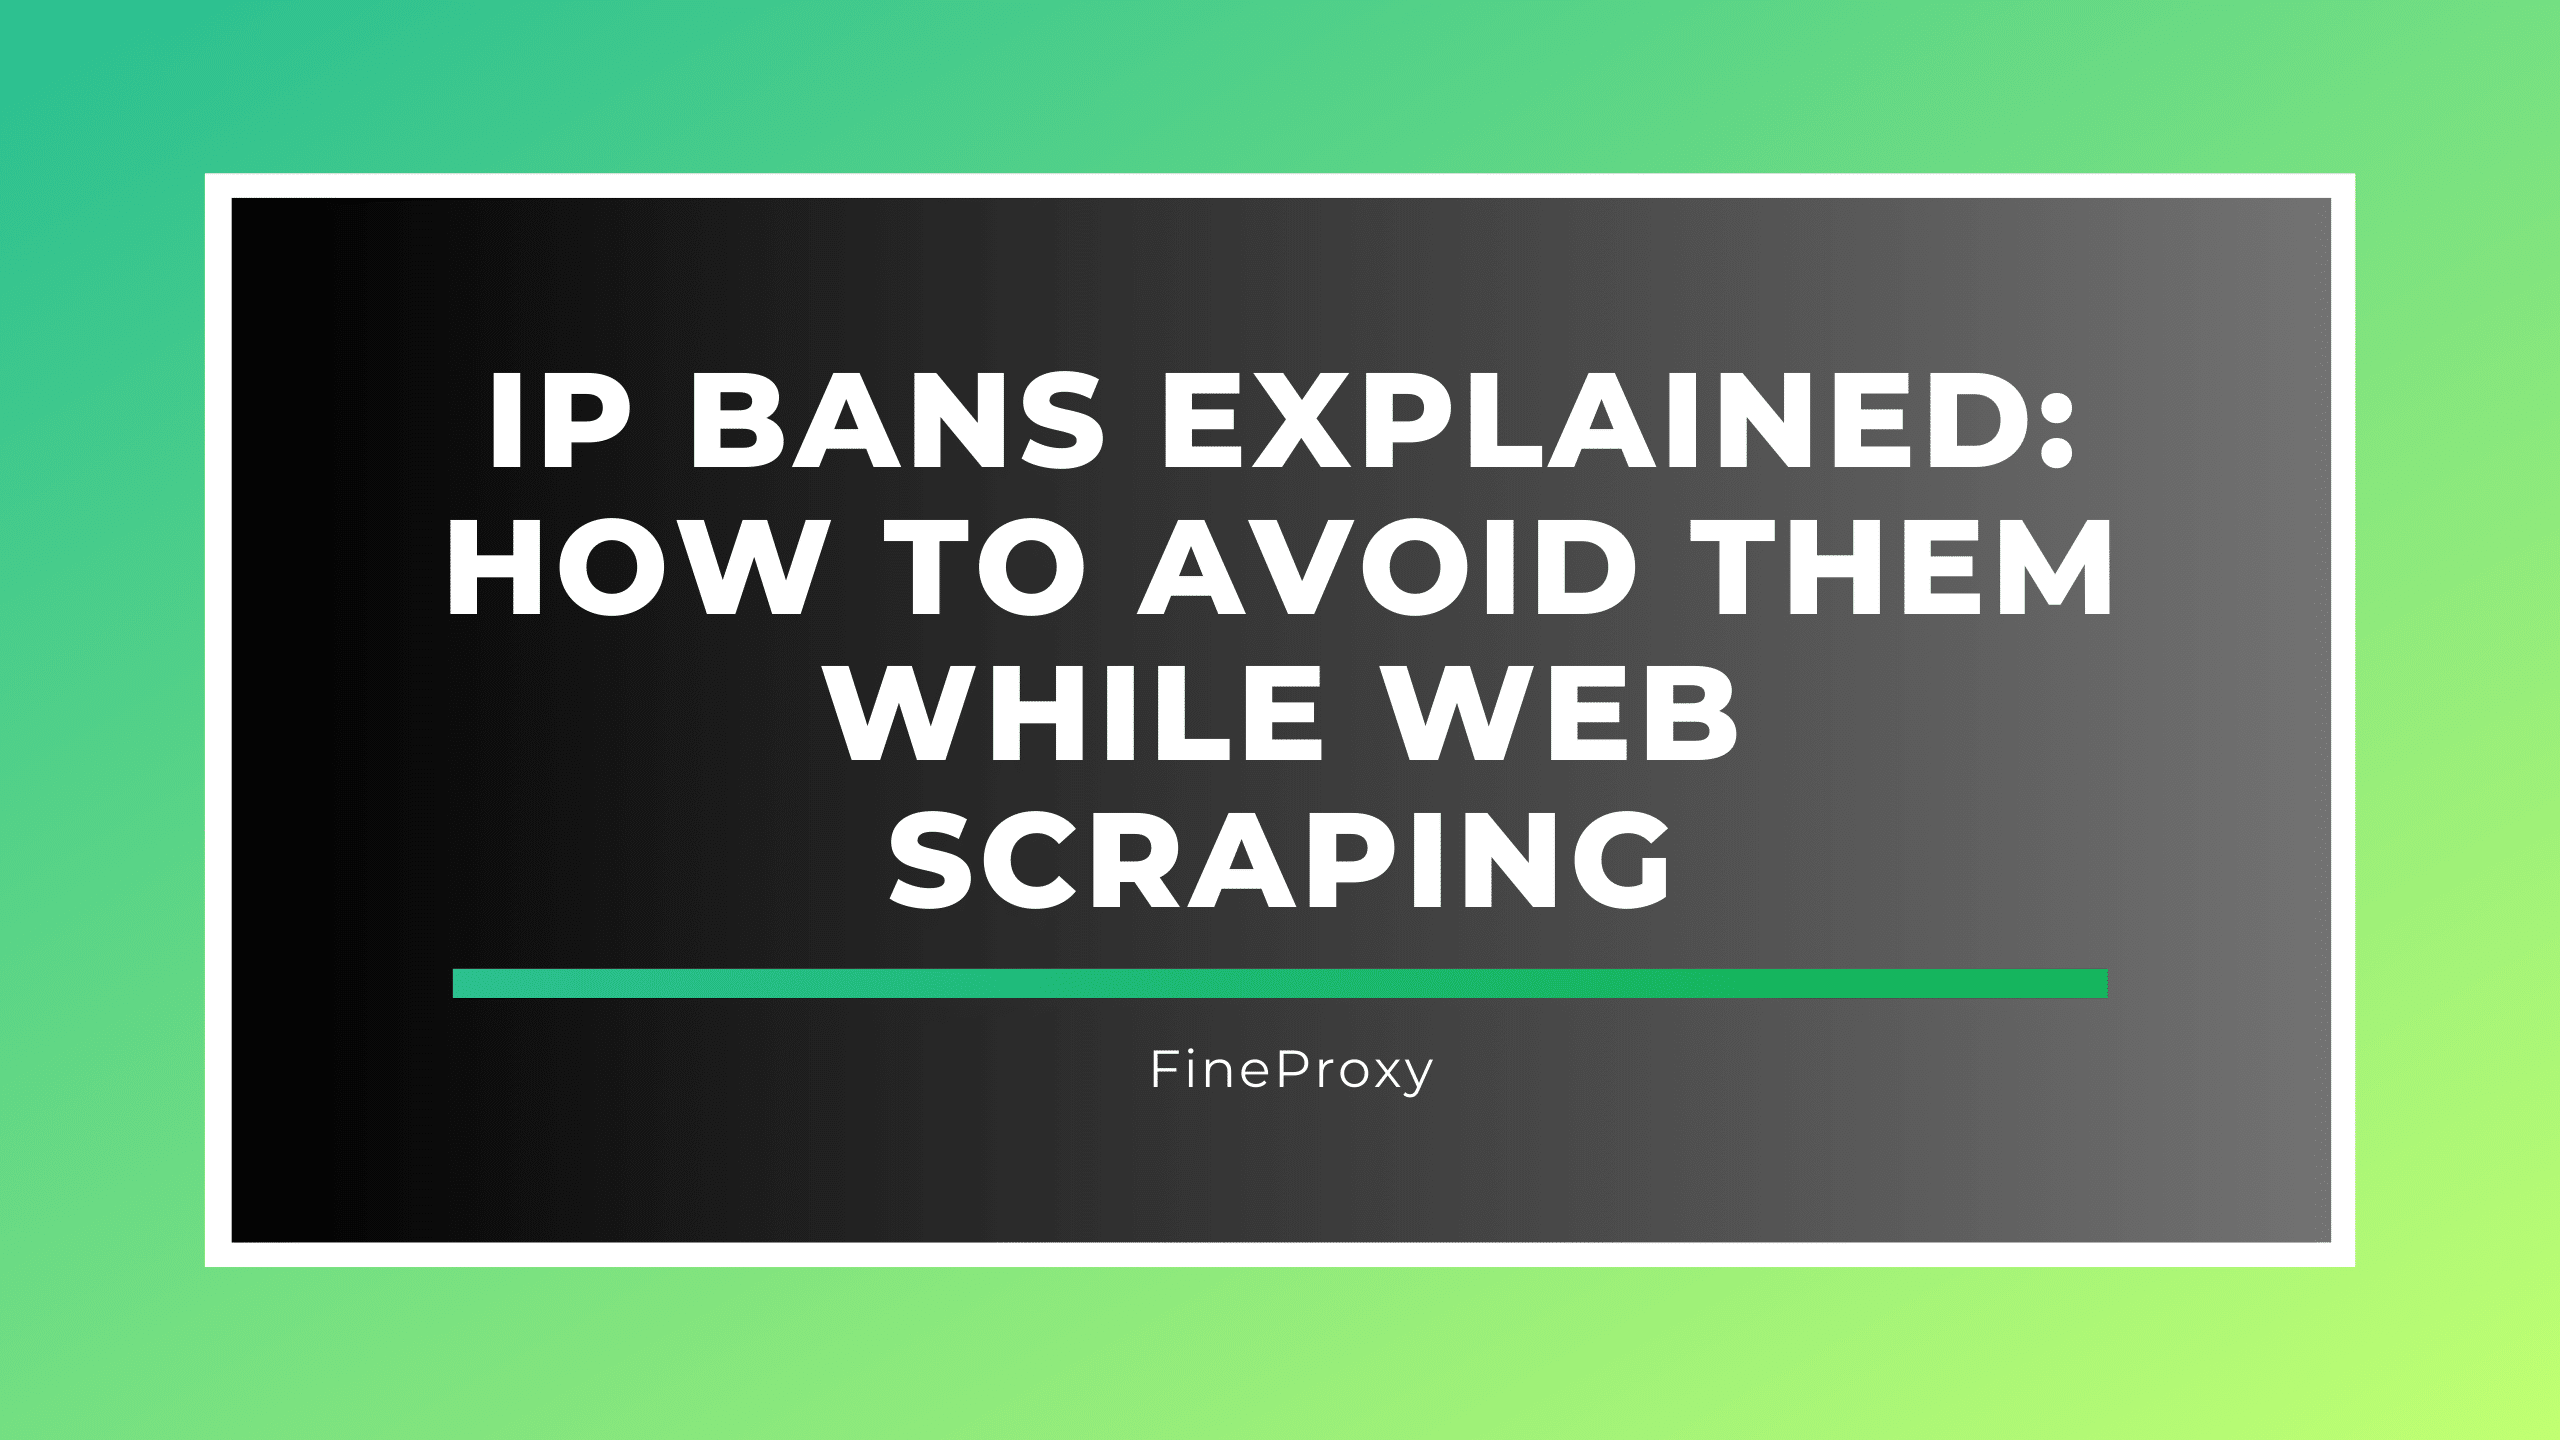 IP Bans Explained: How To Avoid Them While Web Scraping